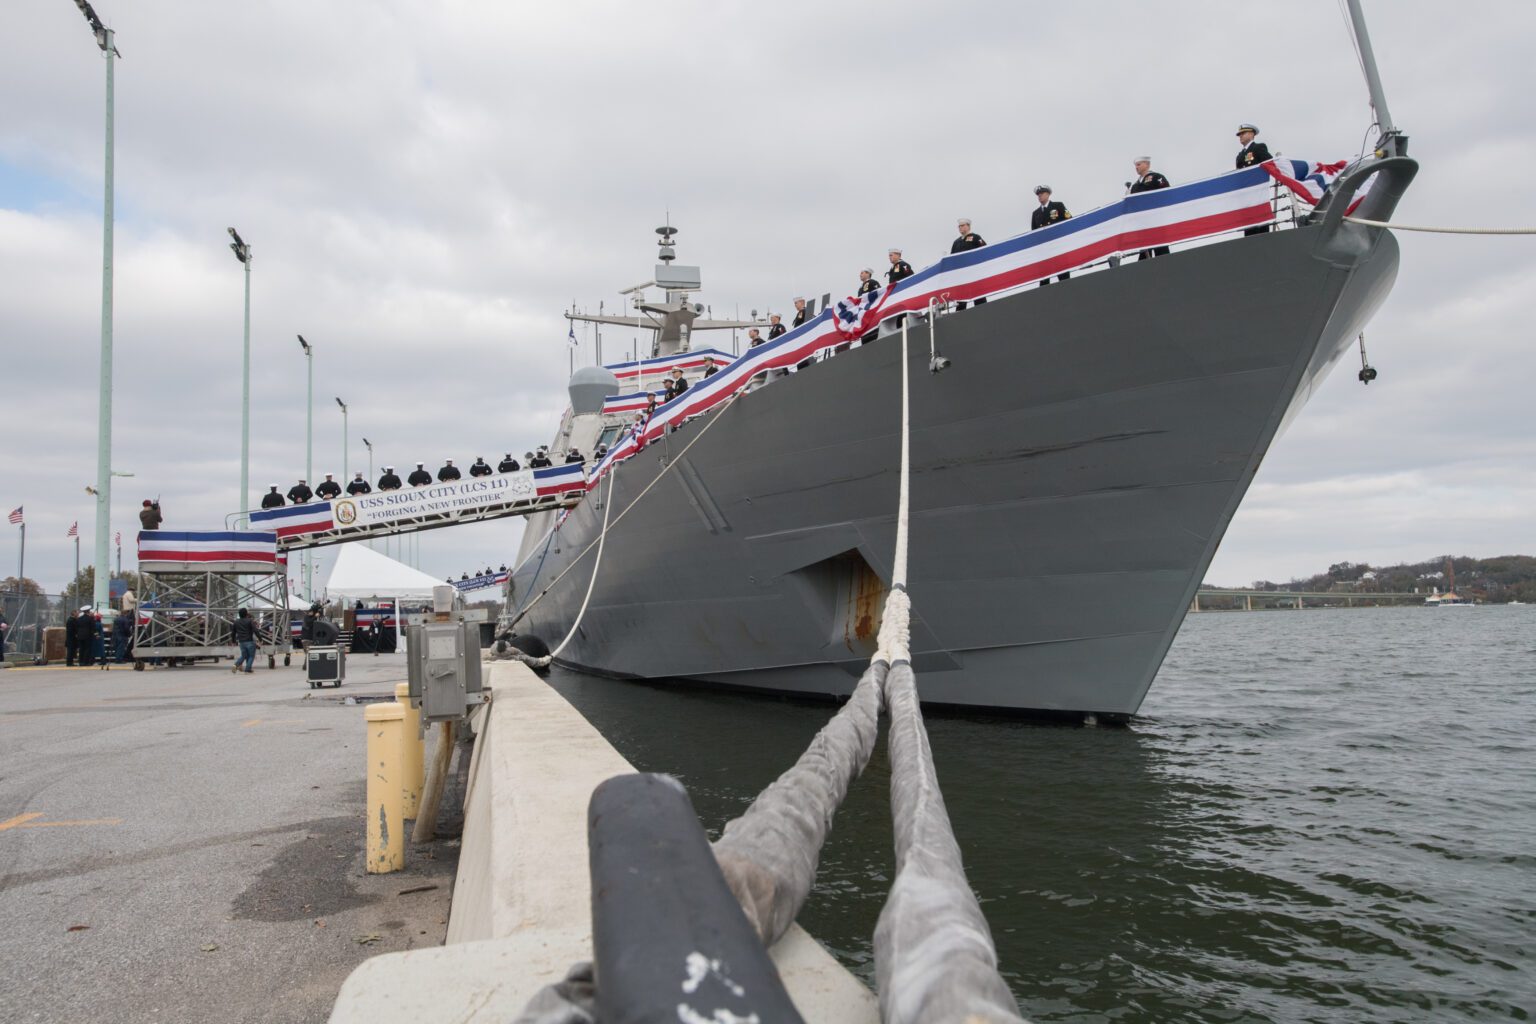 ANNAPOLIS, Md. (Nov. 17, 2018) The crew stand watch during the commissioning ceremony of USS Sioux City (LCS 11). Sioux City is the thirteenth littoral combat ship to enter the fleet and the sixth of the Freedom variant. It is the first ship named for Sioux City, the fourth-largest city in Iowa. (U.S. Navy photo by Kenneth D Aston Jr/Released)